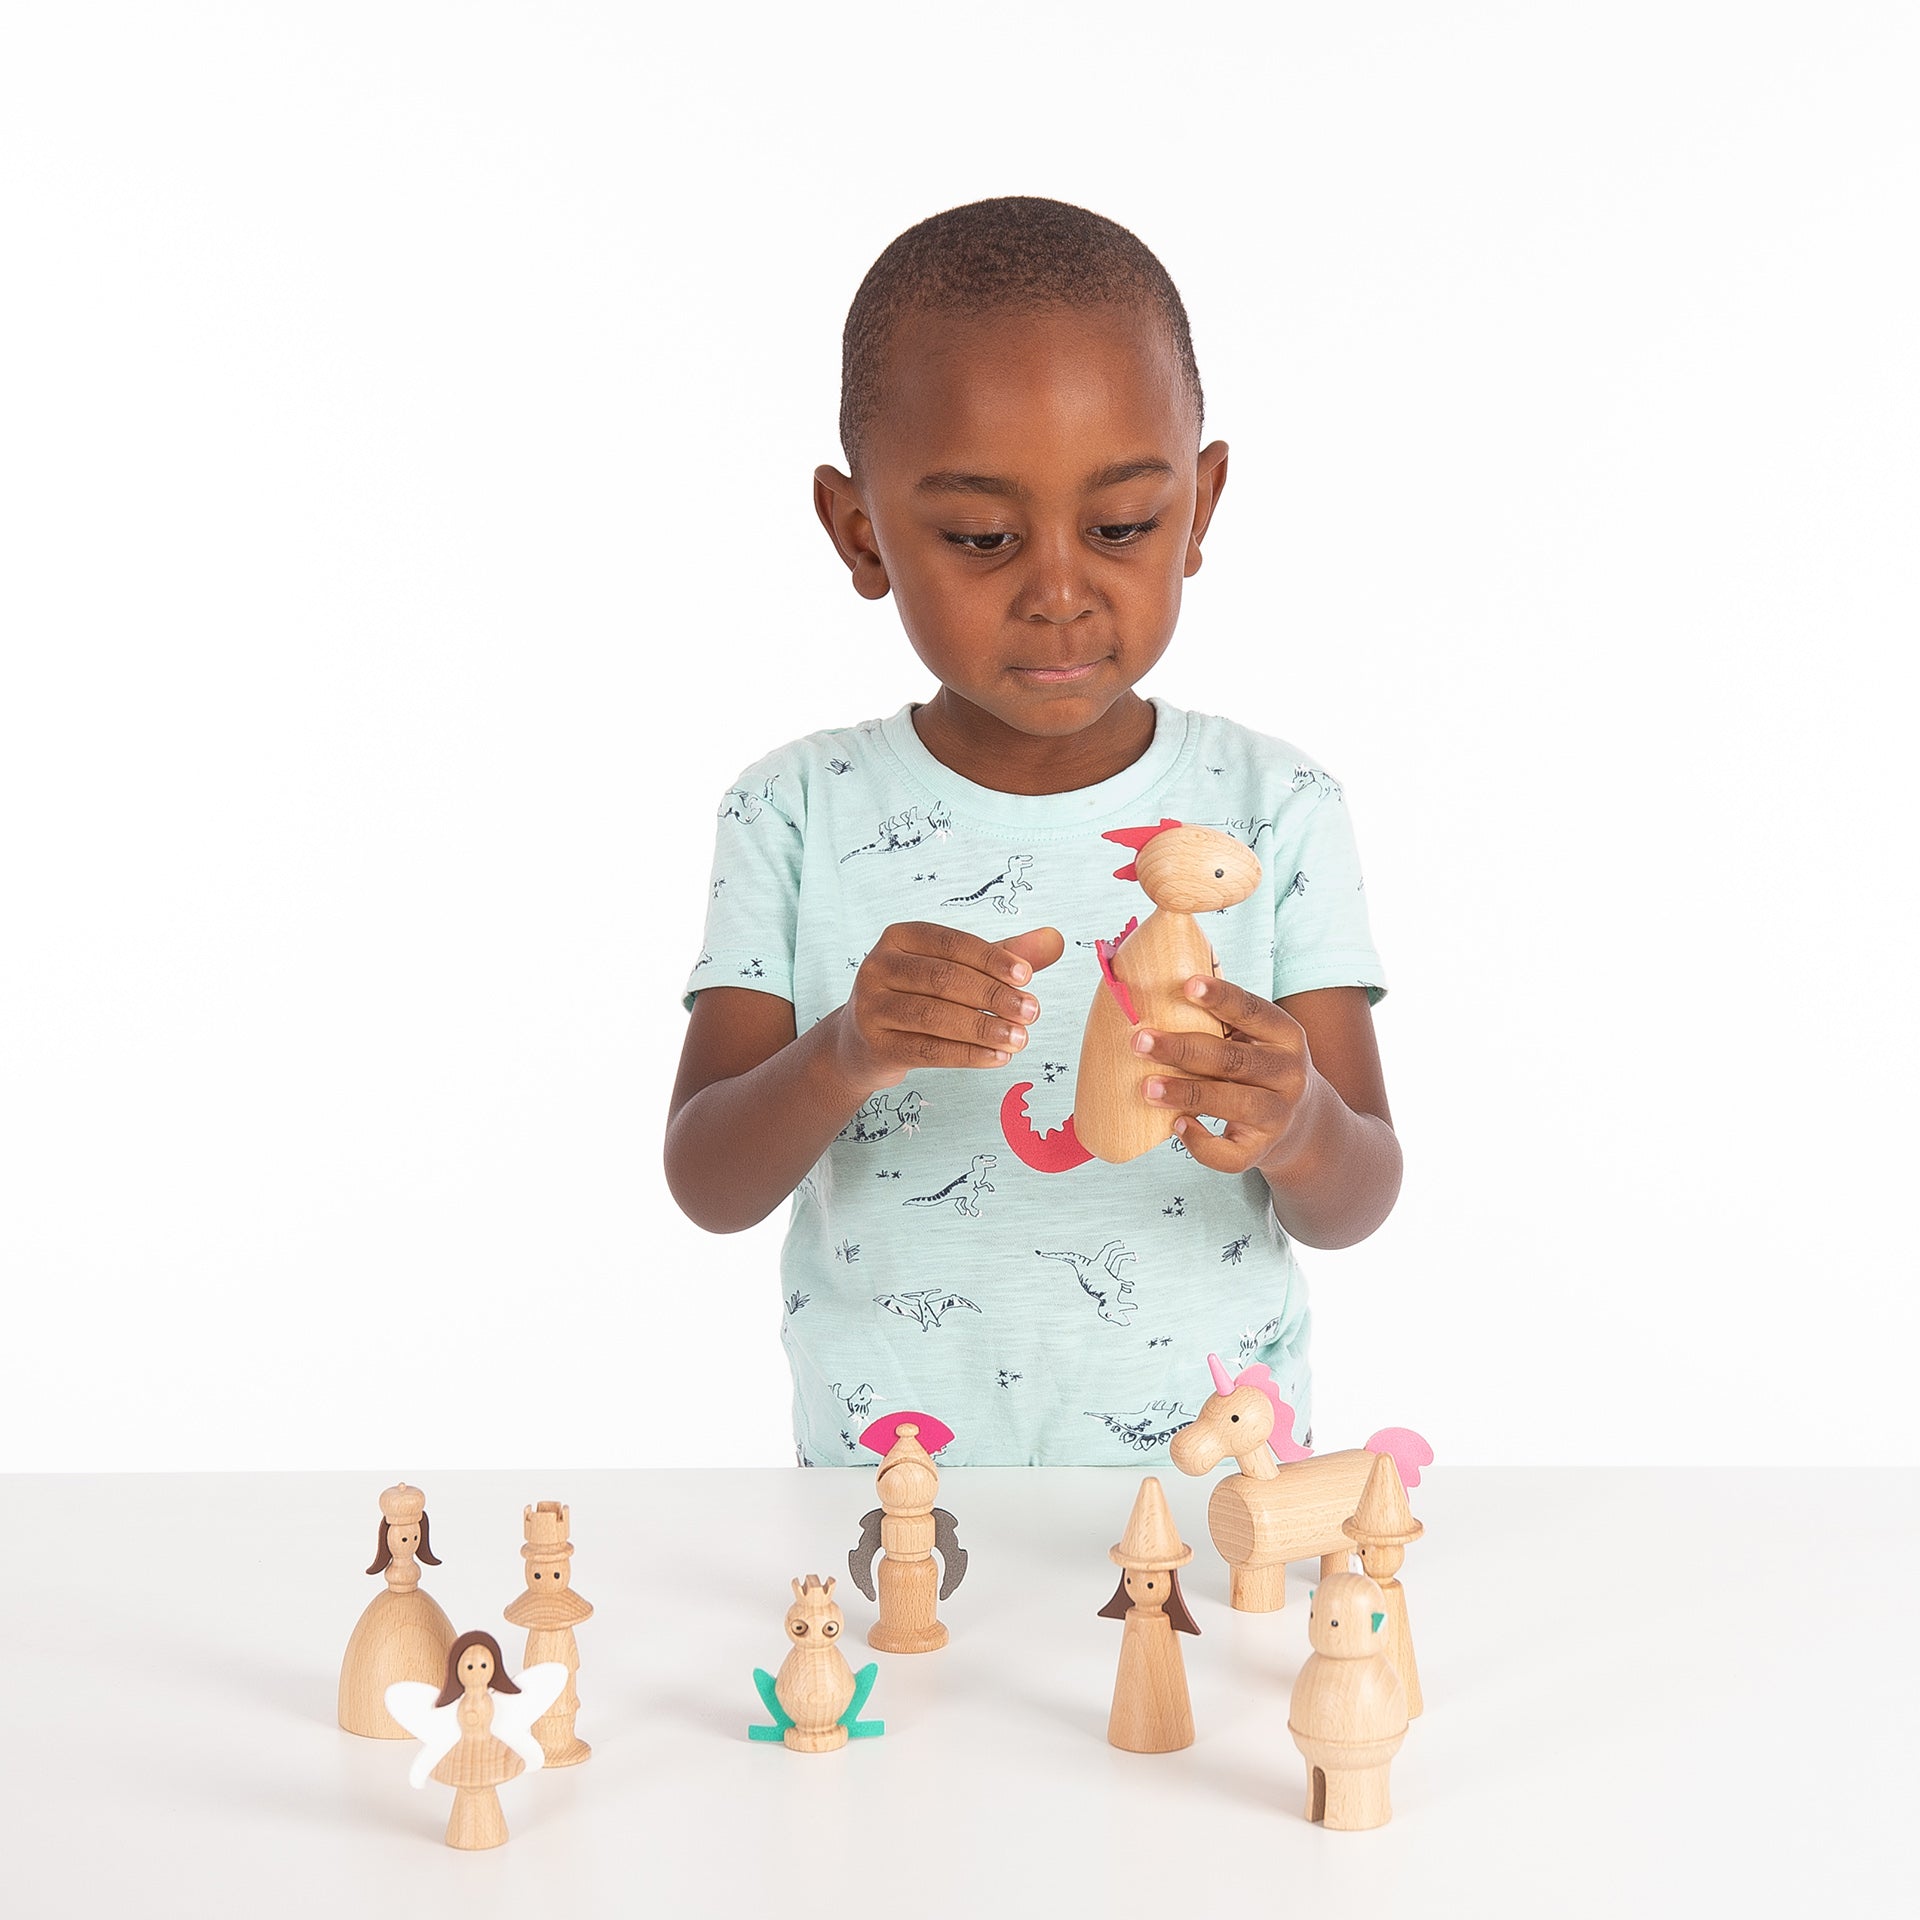 Wooden Enchanted Figures, Your child will love creating their own magical fairy tale with our TickiT® Wooden Enchanted Figures. A spellbinding set of 10 characters from traditional fairy stories made from beautiful solid beechwood, including a king, queen, witch, wizard, fairy, knight, dragon, unicorn, frog-prince and ogre. Natural and smooth with simple printed features and faux leather embellishments, these charming figures are fun and tactile. Your child can use them in imaginative play, small world play